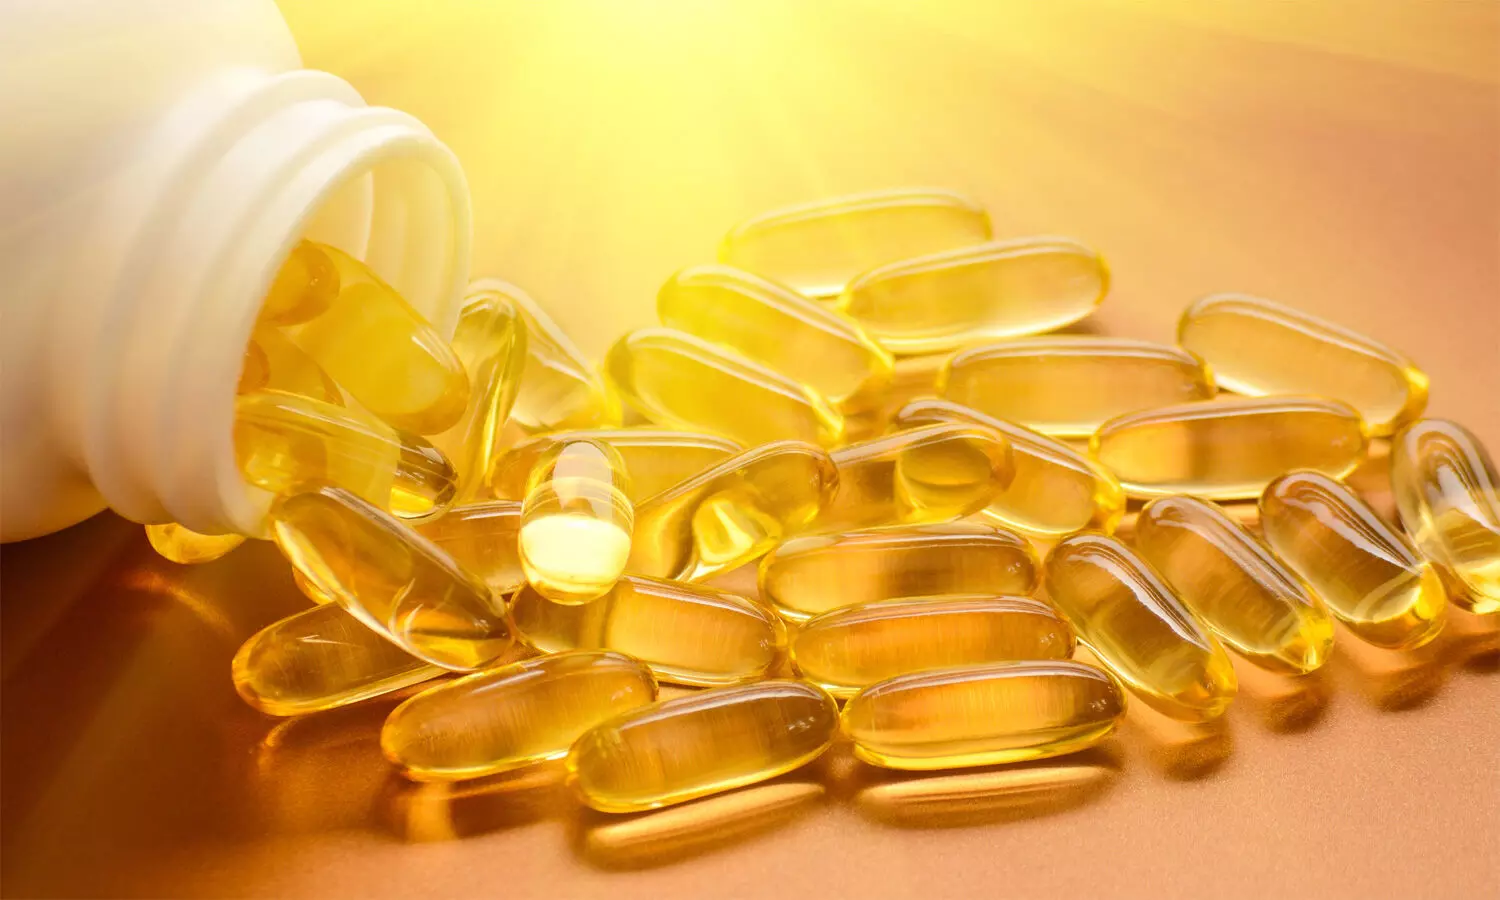 Vitamin D may prevent cancer death in people aged above 50 years: Study